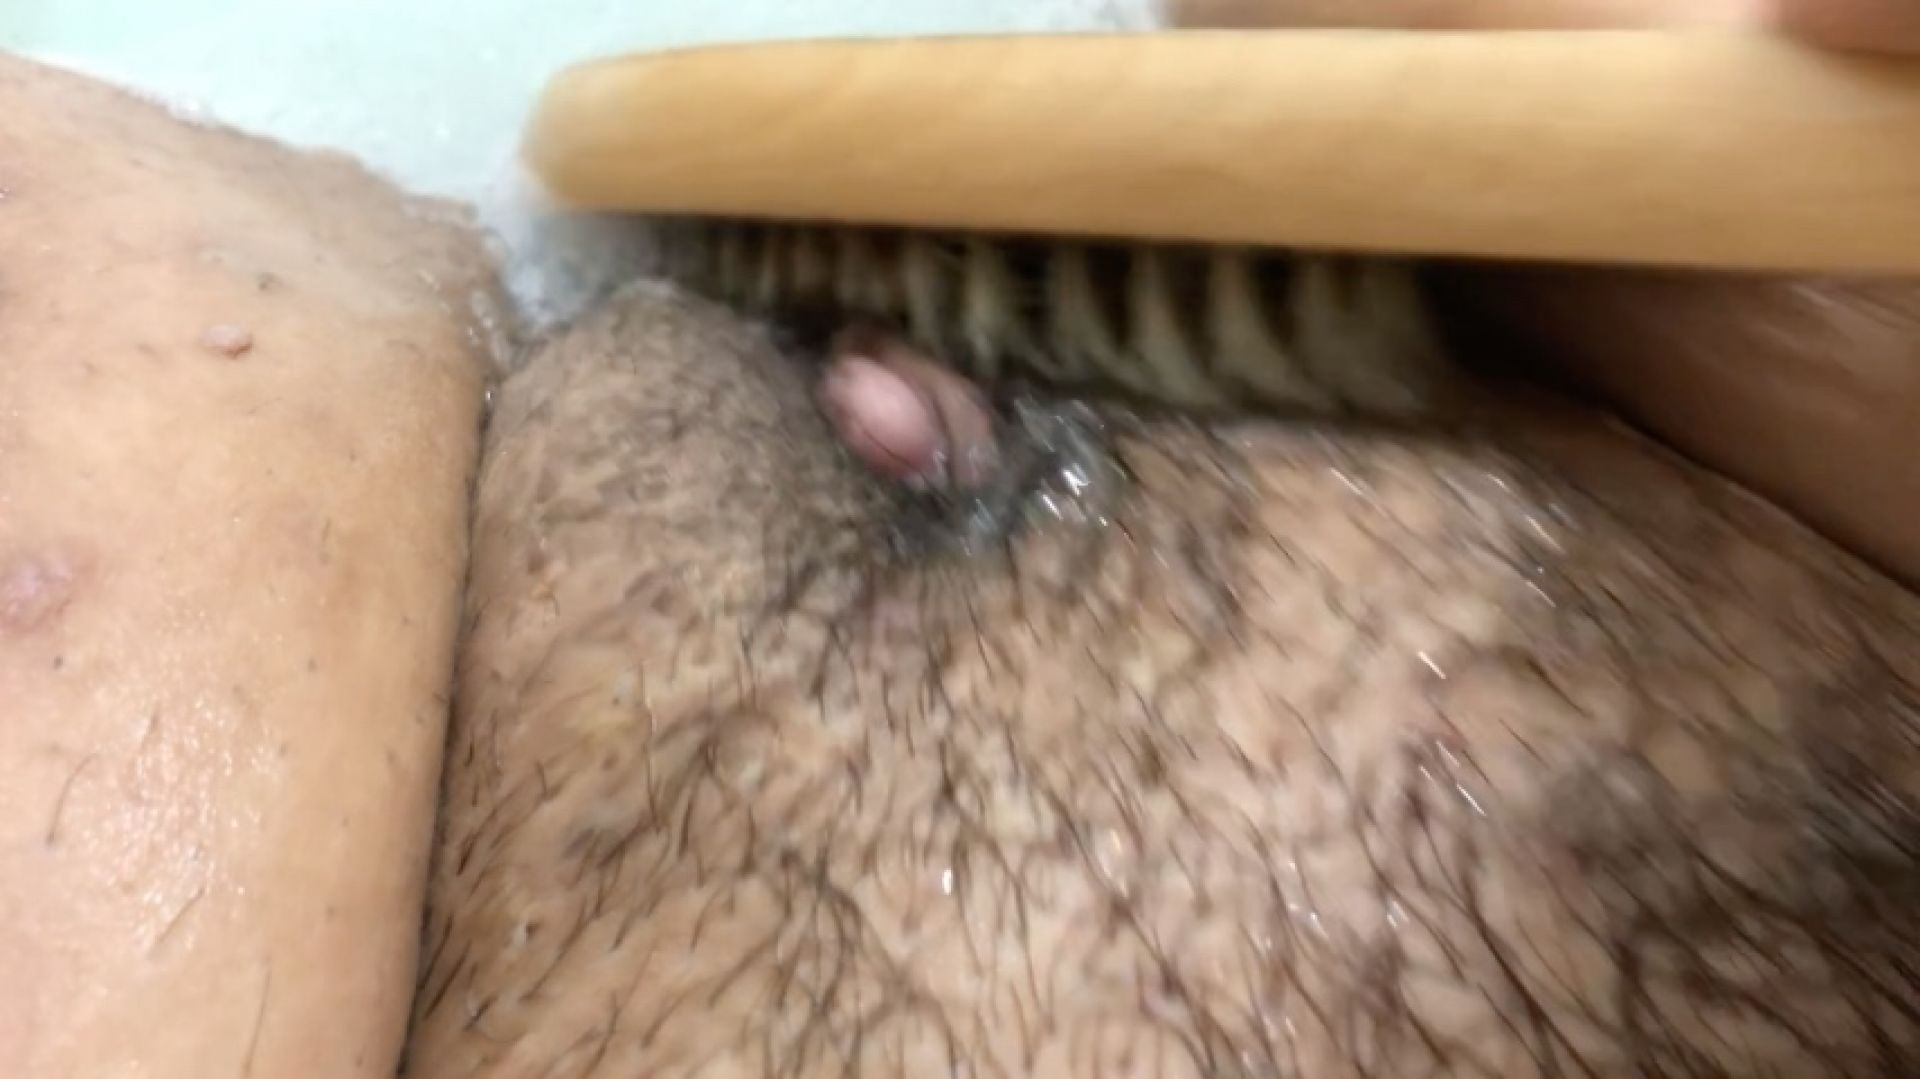 Bath time CBT with a shower brush